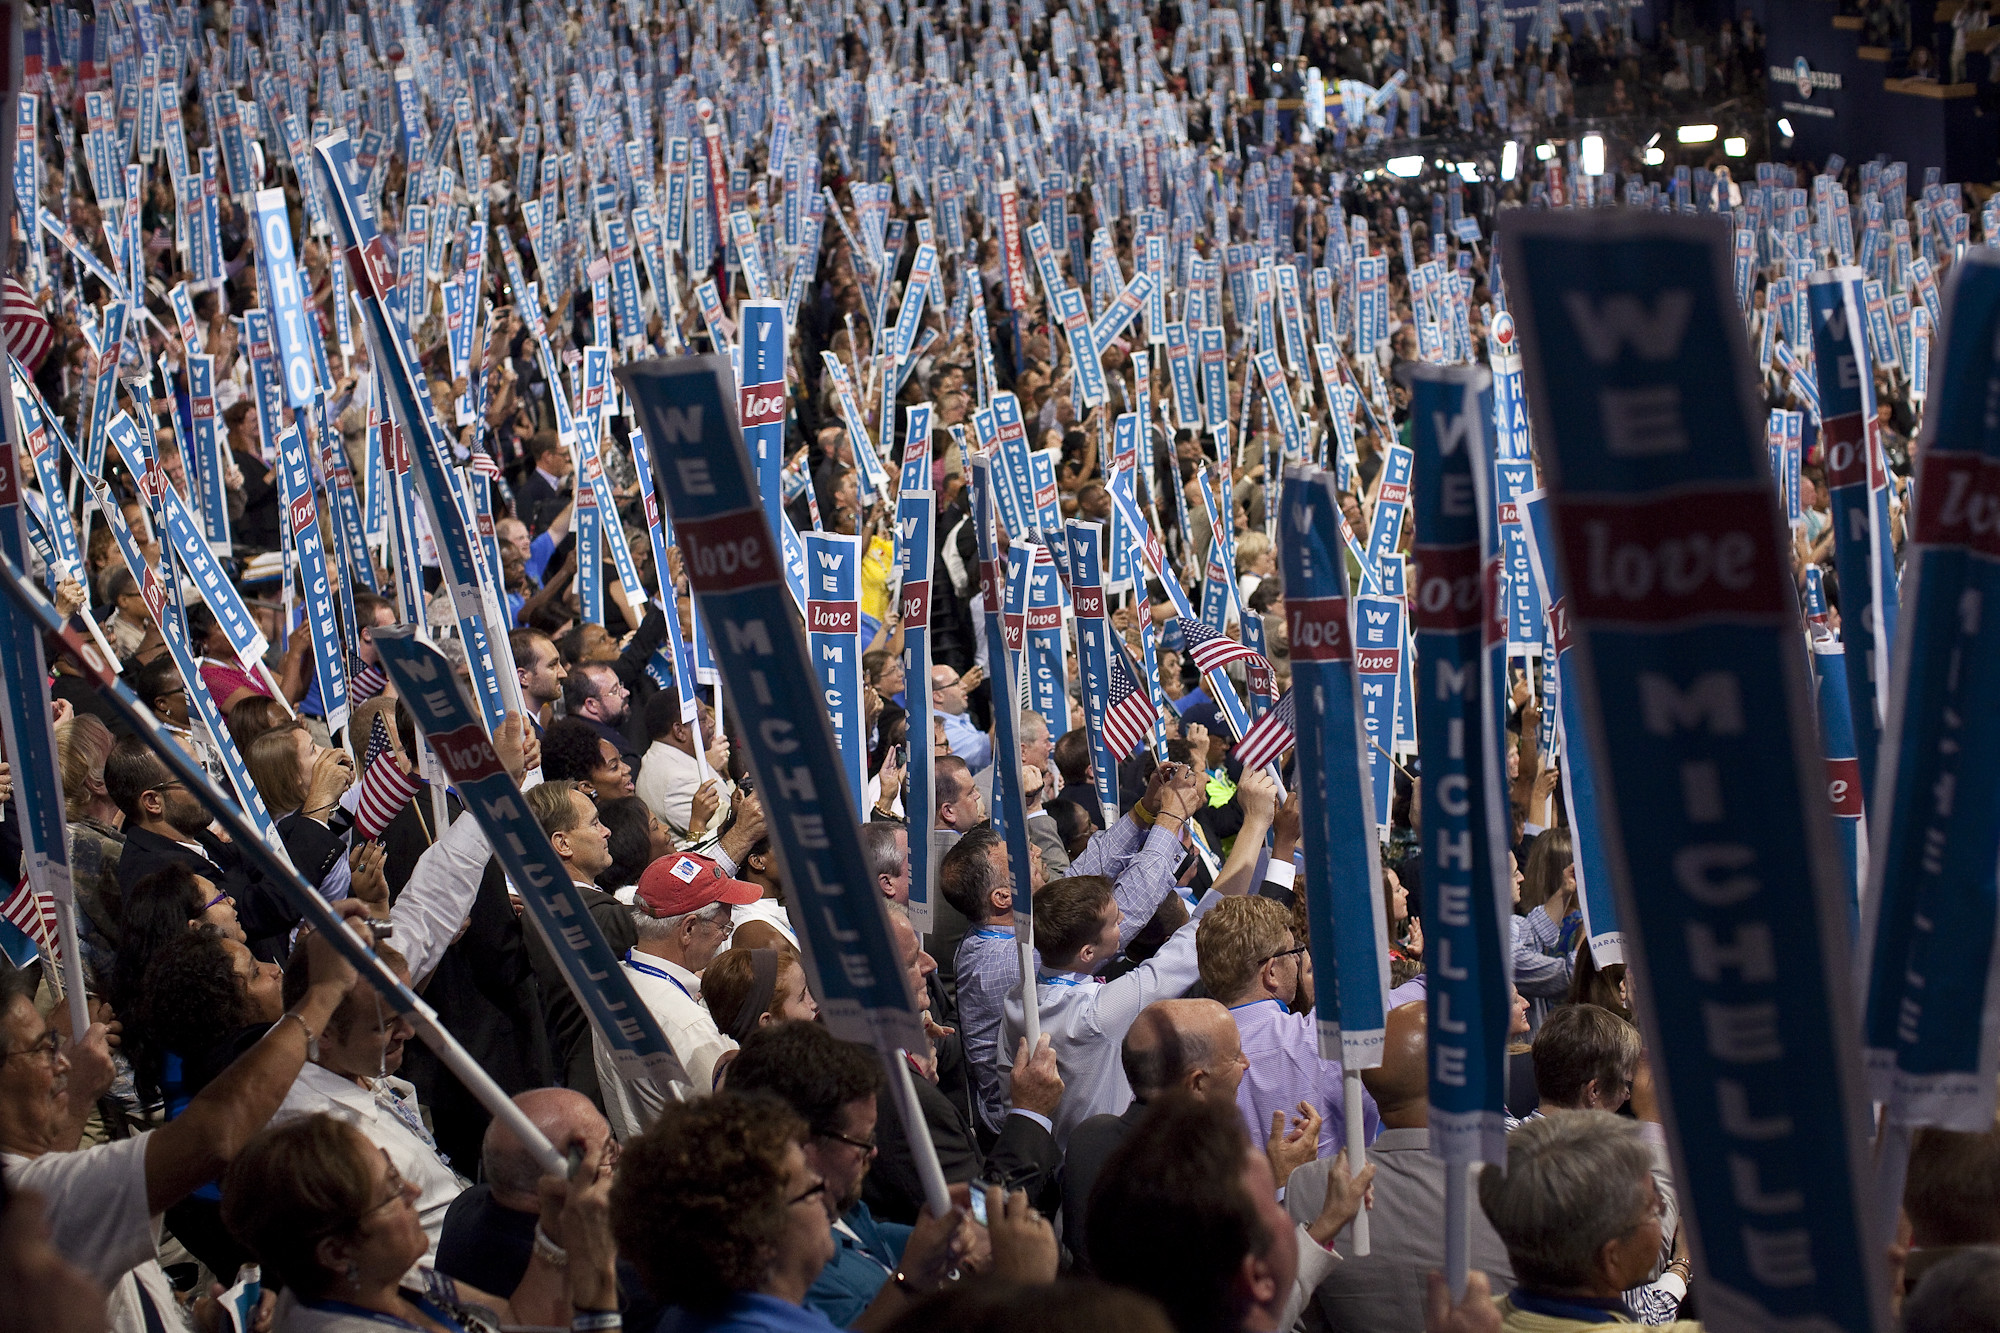 Banners at the 2008 DNC.